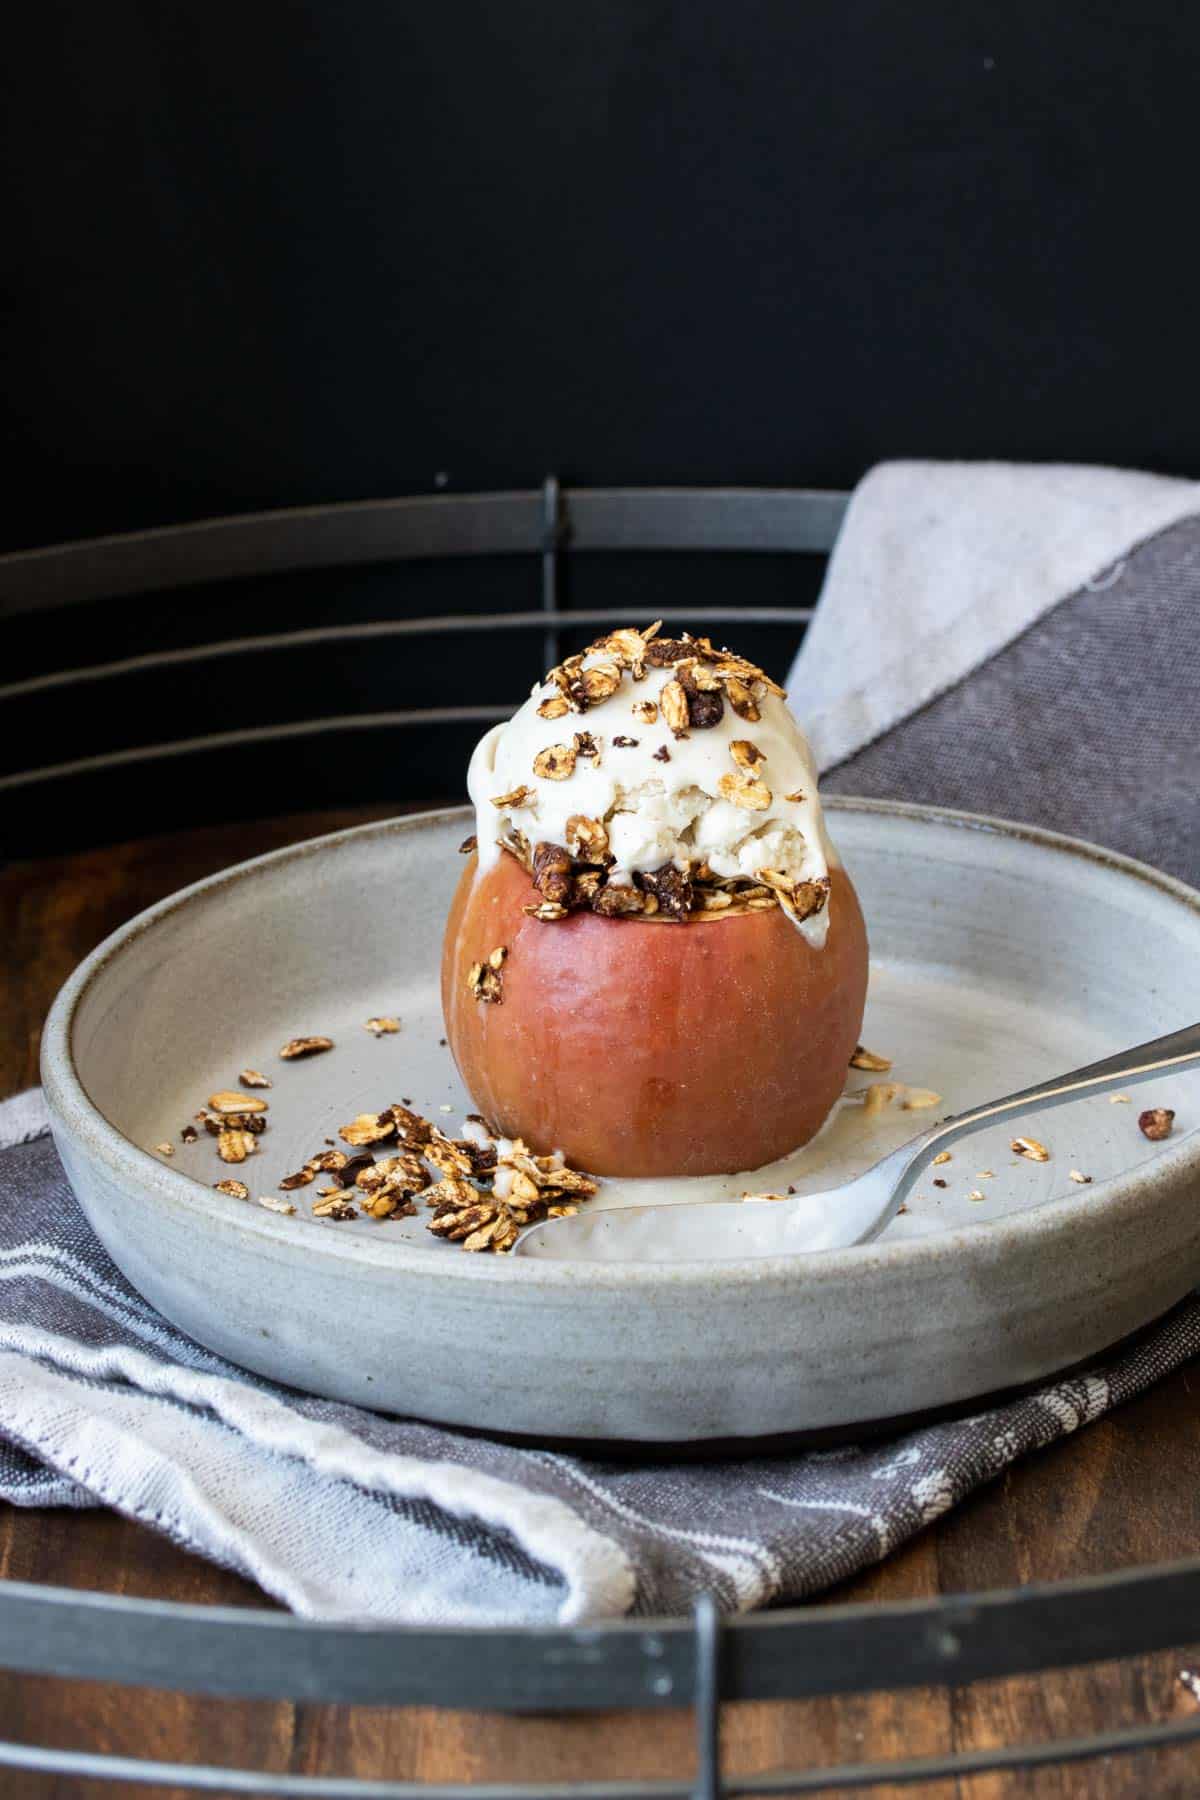 A whole baked apple topped with ice cream on a grey plate